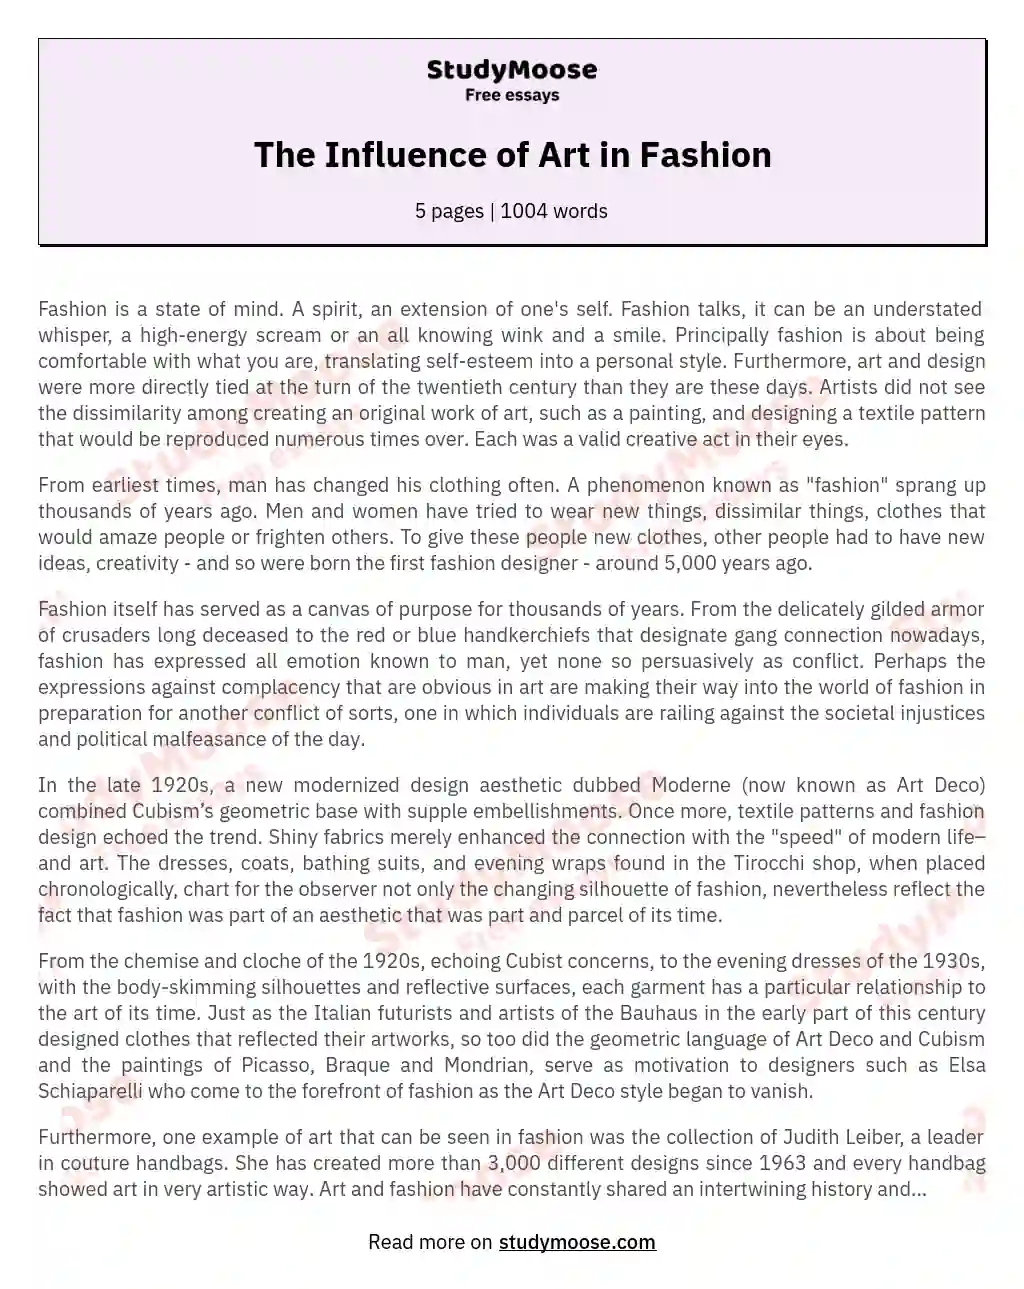 The Influence of Art in Fashion